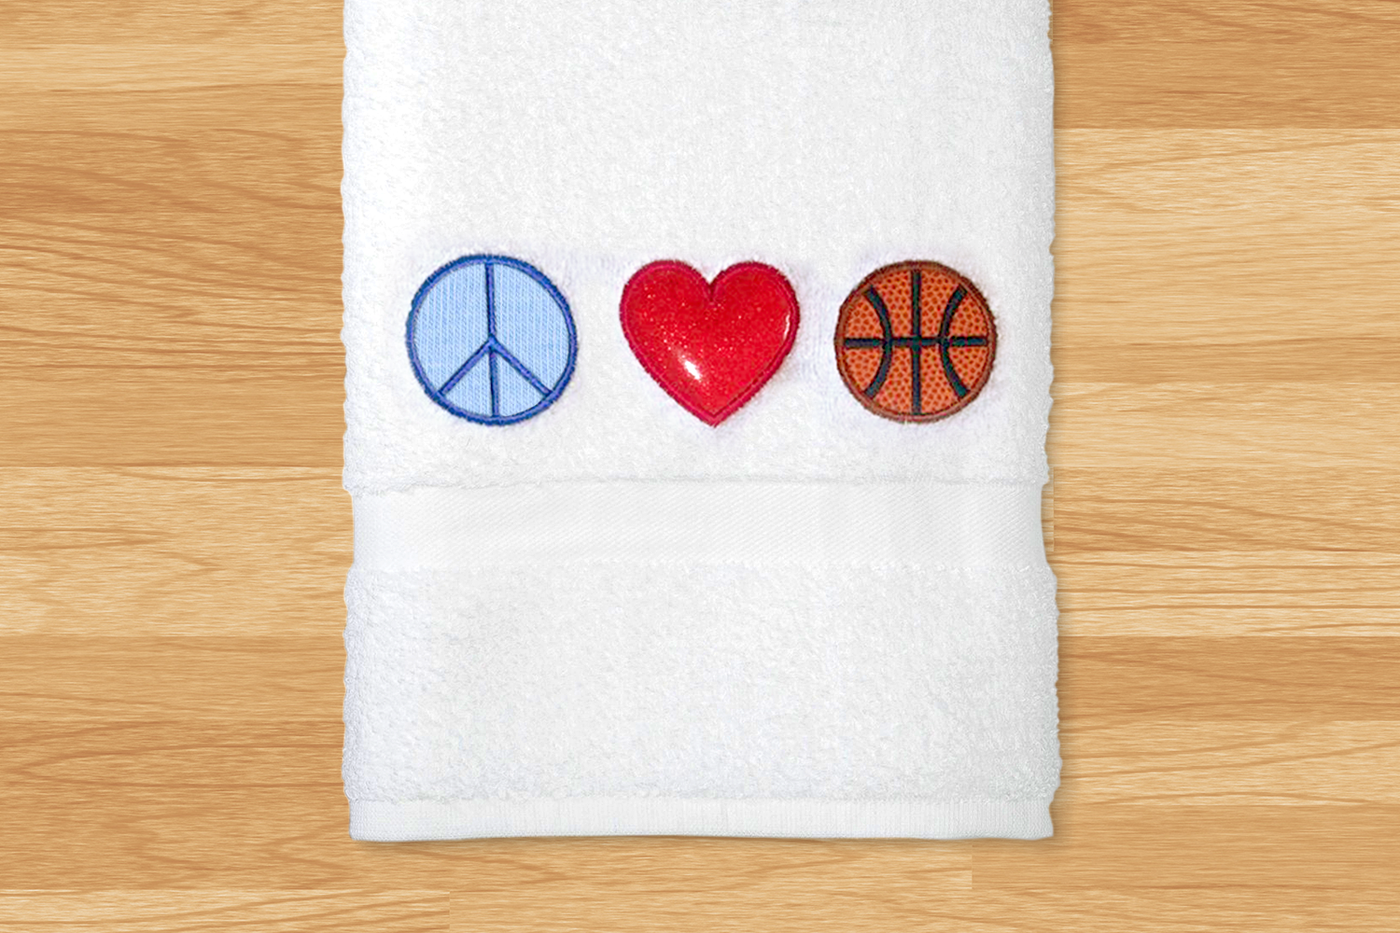 Applique design that has the symbol for peace, a heart, and a basketball.